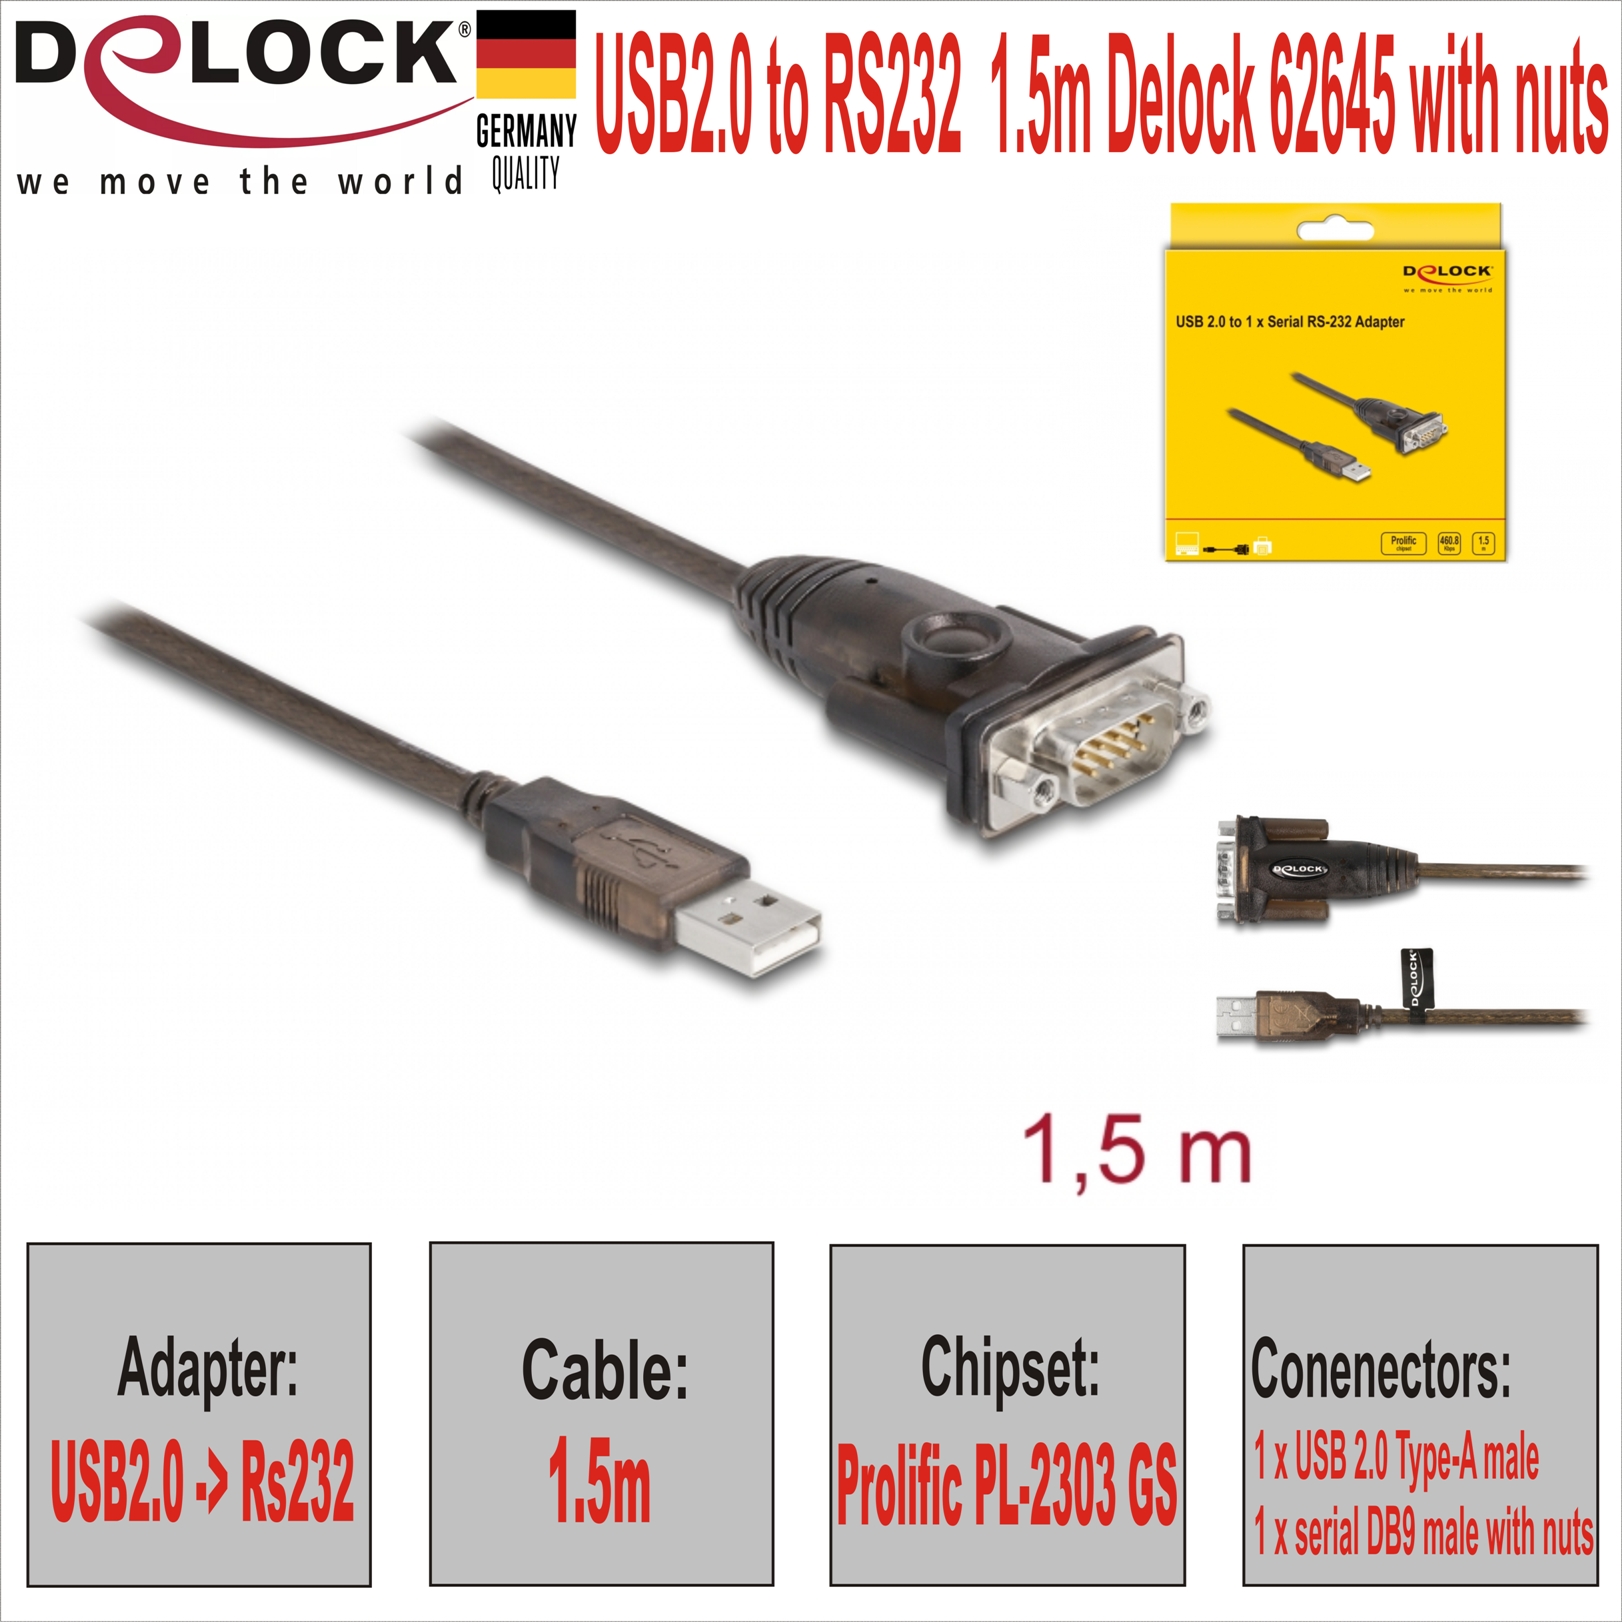 USB2.0 to RS232  1.5m Delock 62645 with nuts